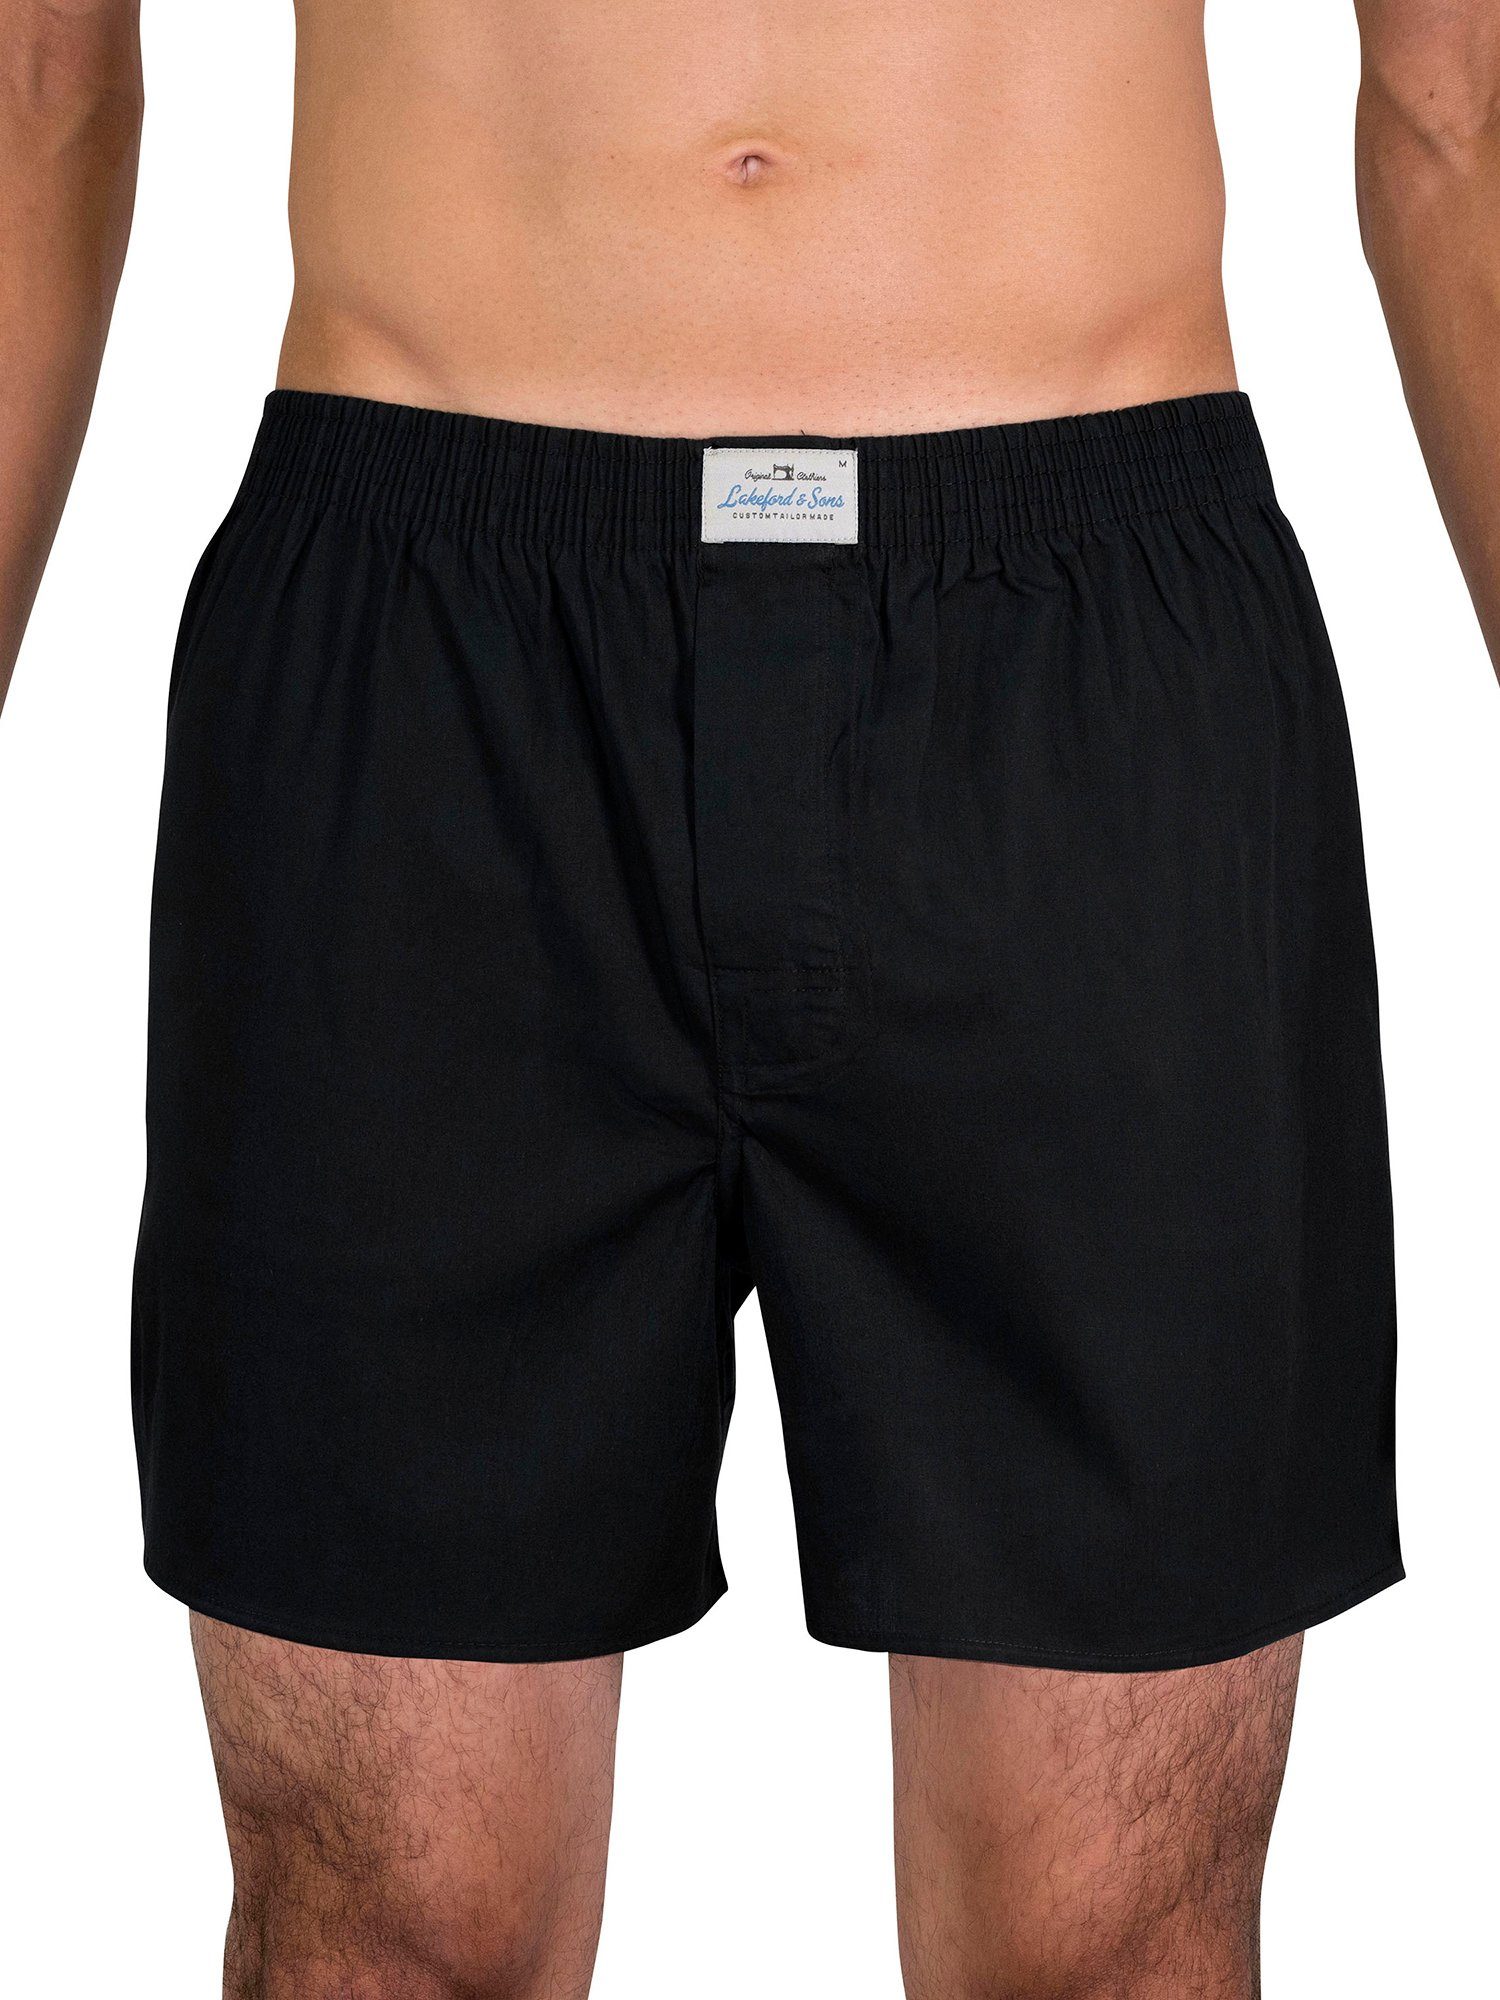 Lakeford & Sons Dyed' 3-Pack Boxer 'Uni